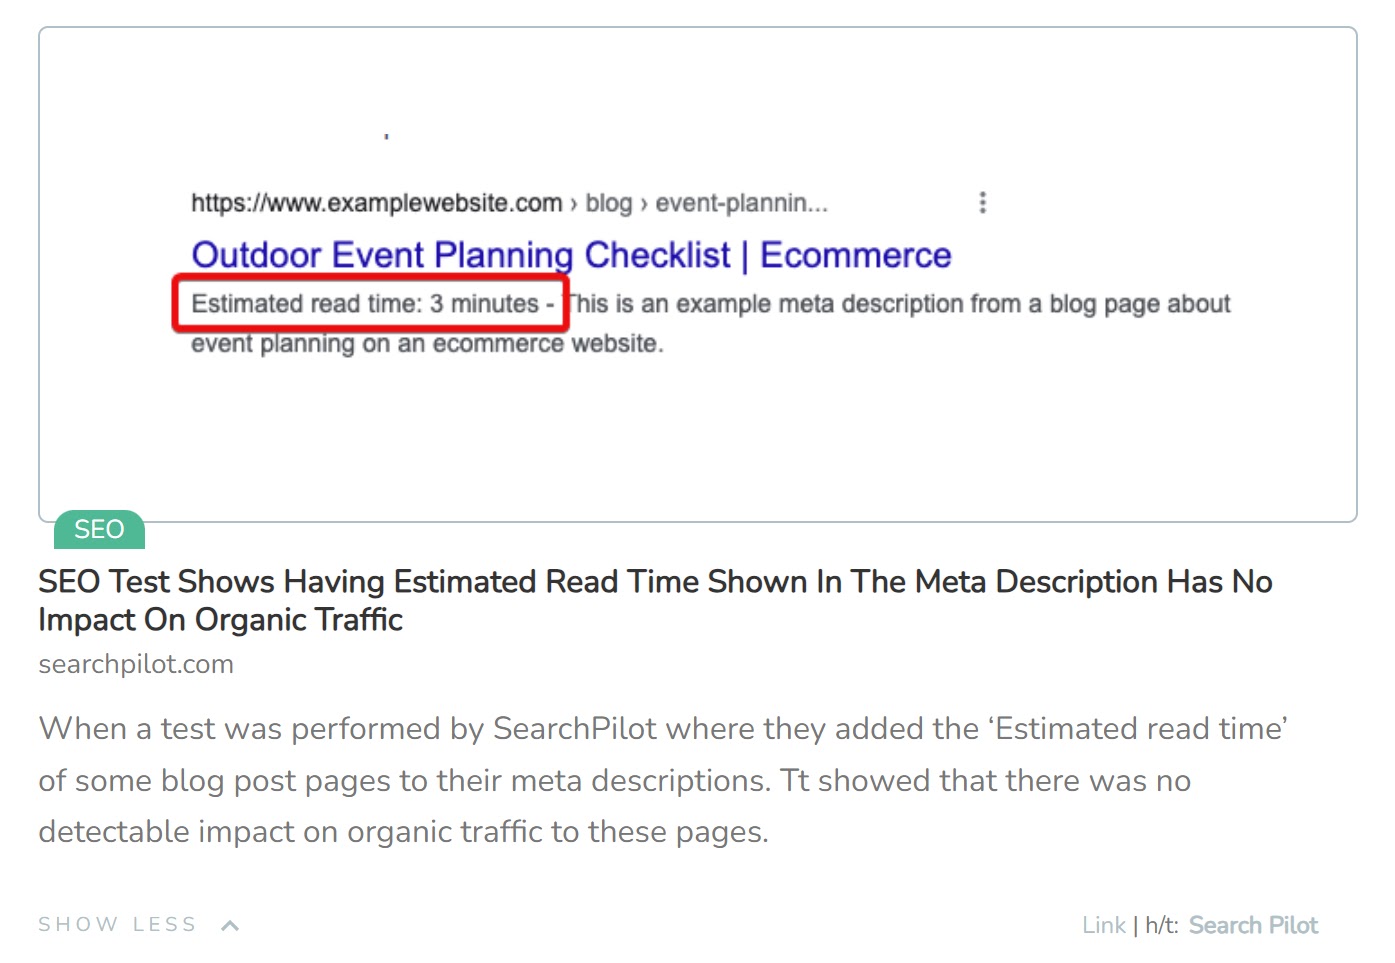 A meta description test included in TL;DR Marketing newsletter